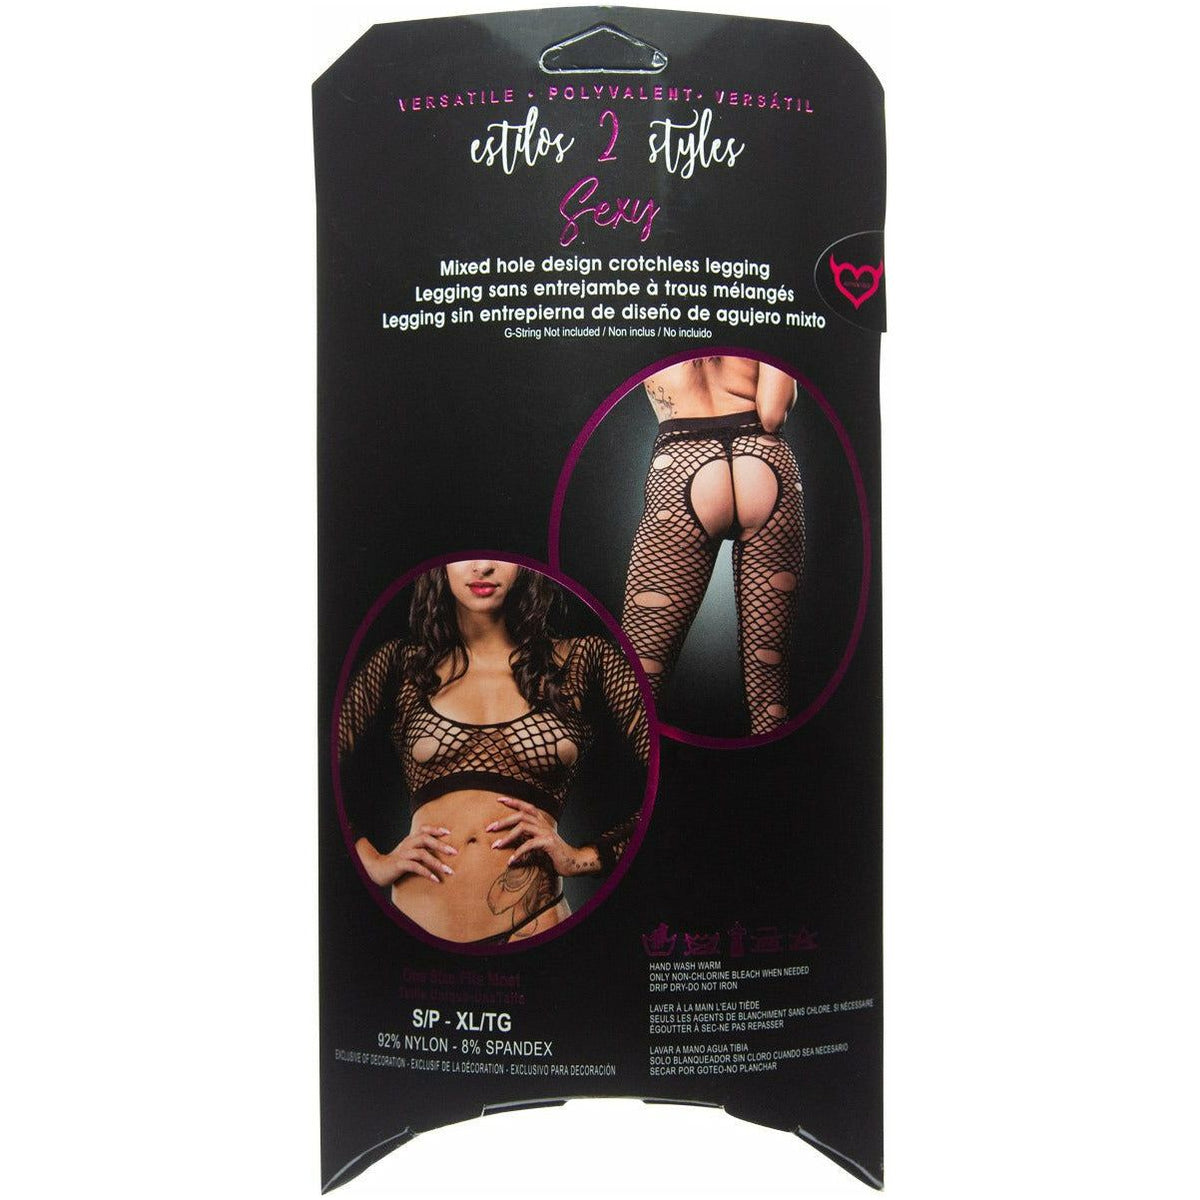 Beverly Hills Naughty Girl - Mixed Hole Design Crotchless Leggings - Black - One Size